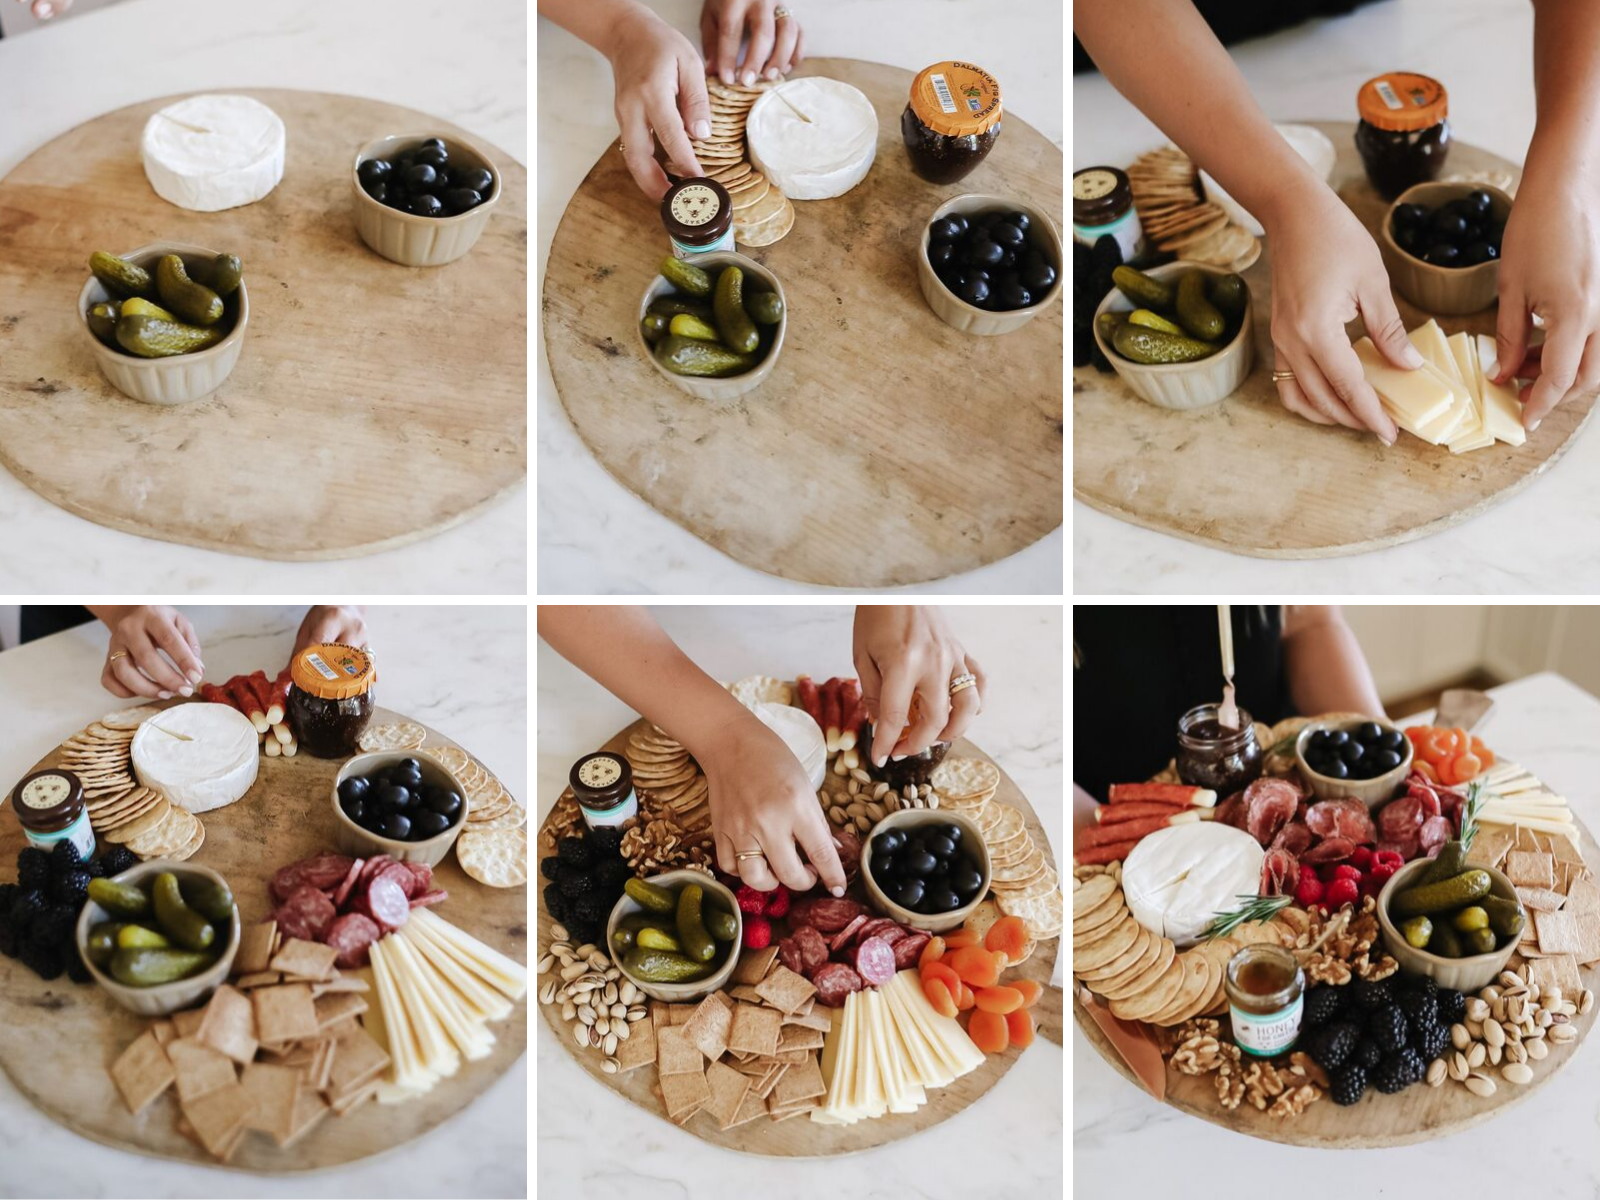 How to make a charcuterie board